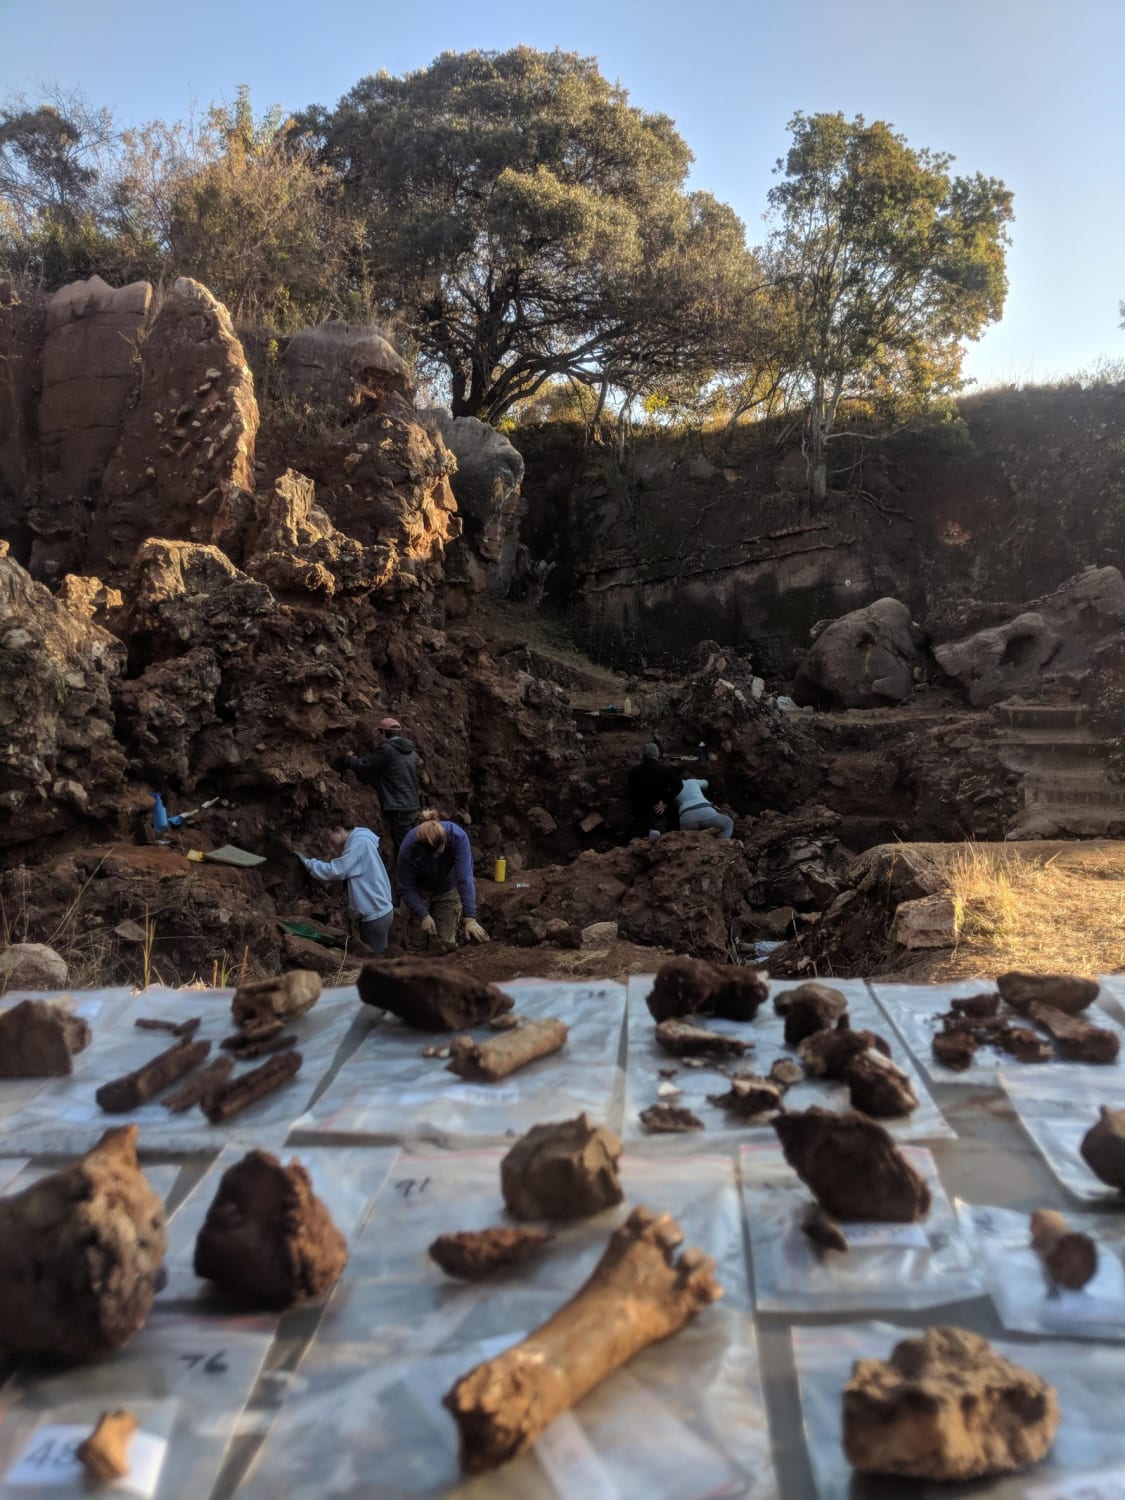 In Groundbreaking Find, Three Kinds of Early Humans Unearthed Living Together in South Africa